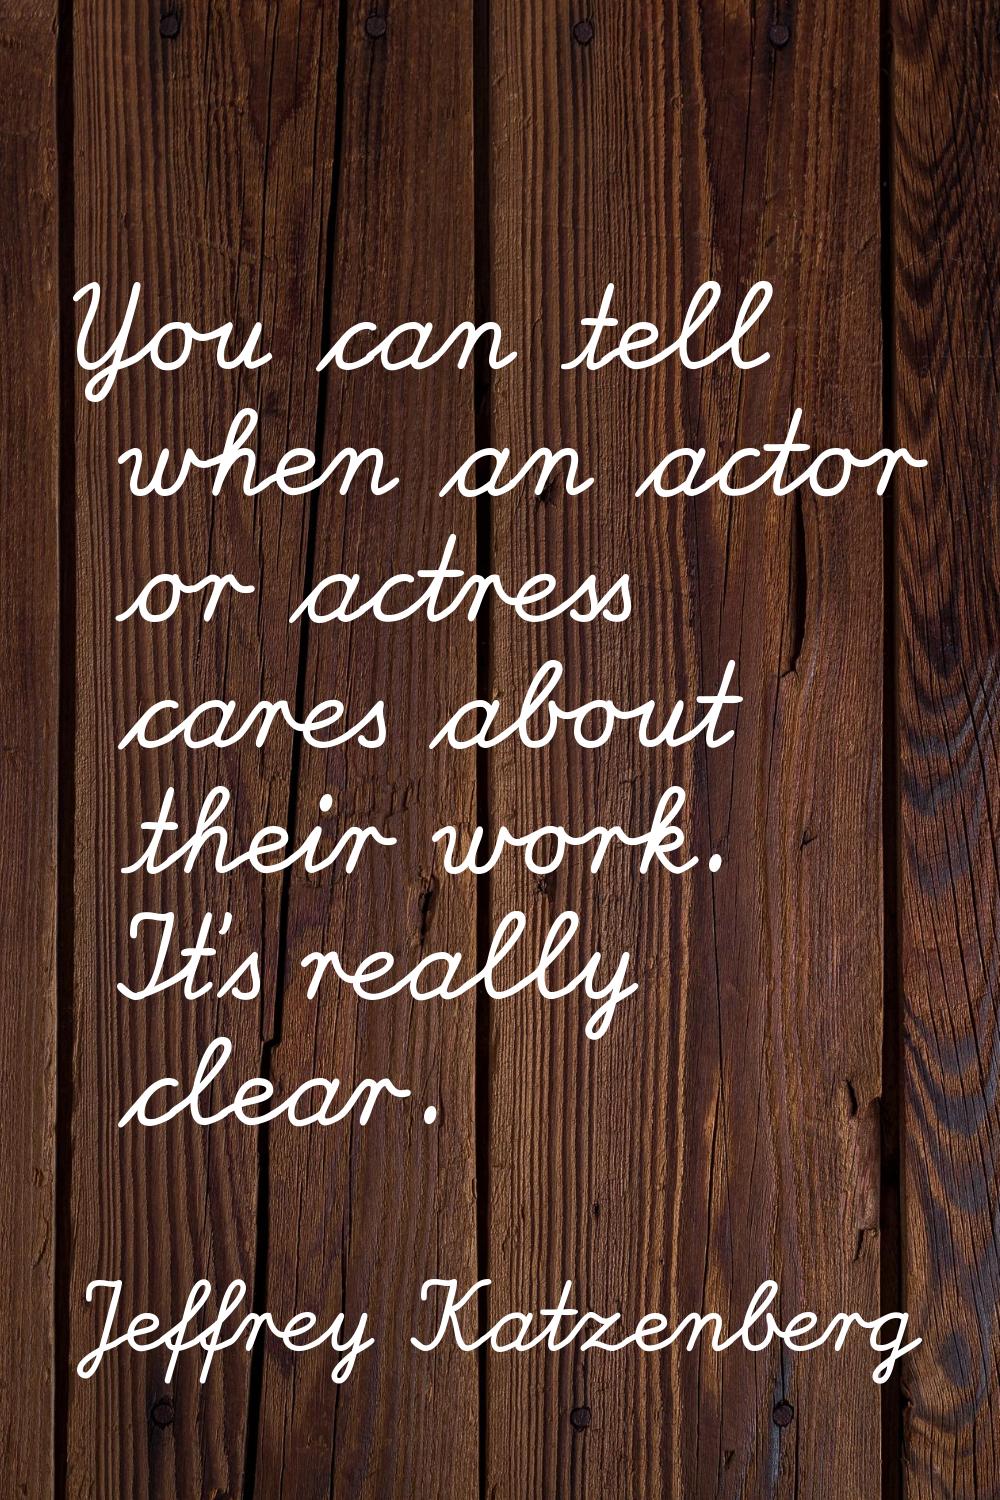 You can tell when an actor or actress cares about their work. It's really clear.